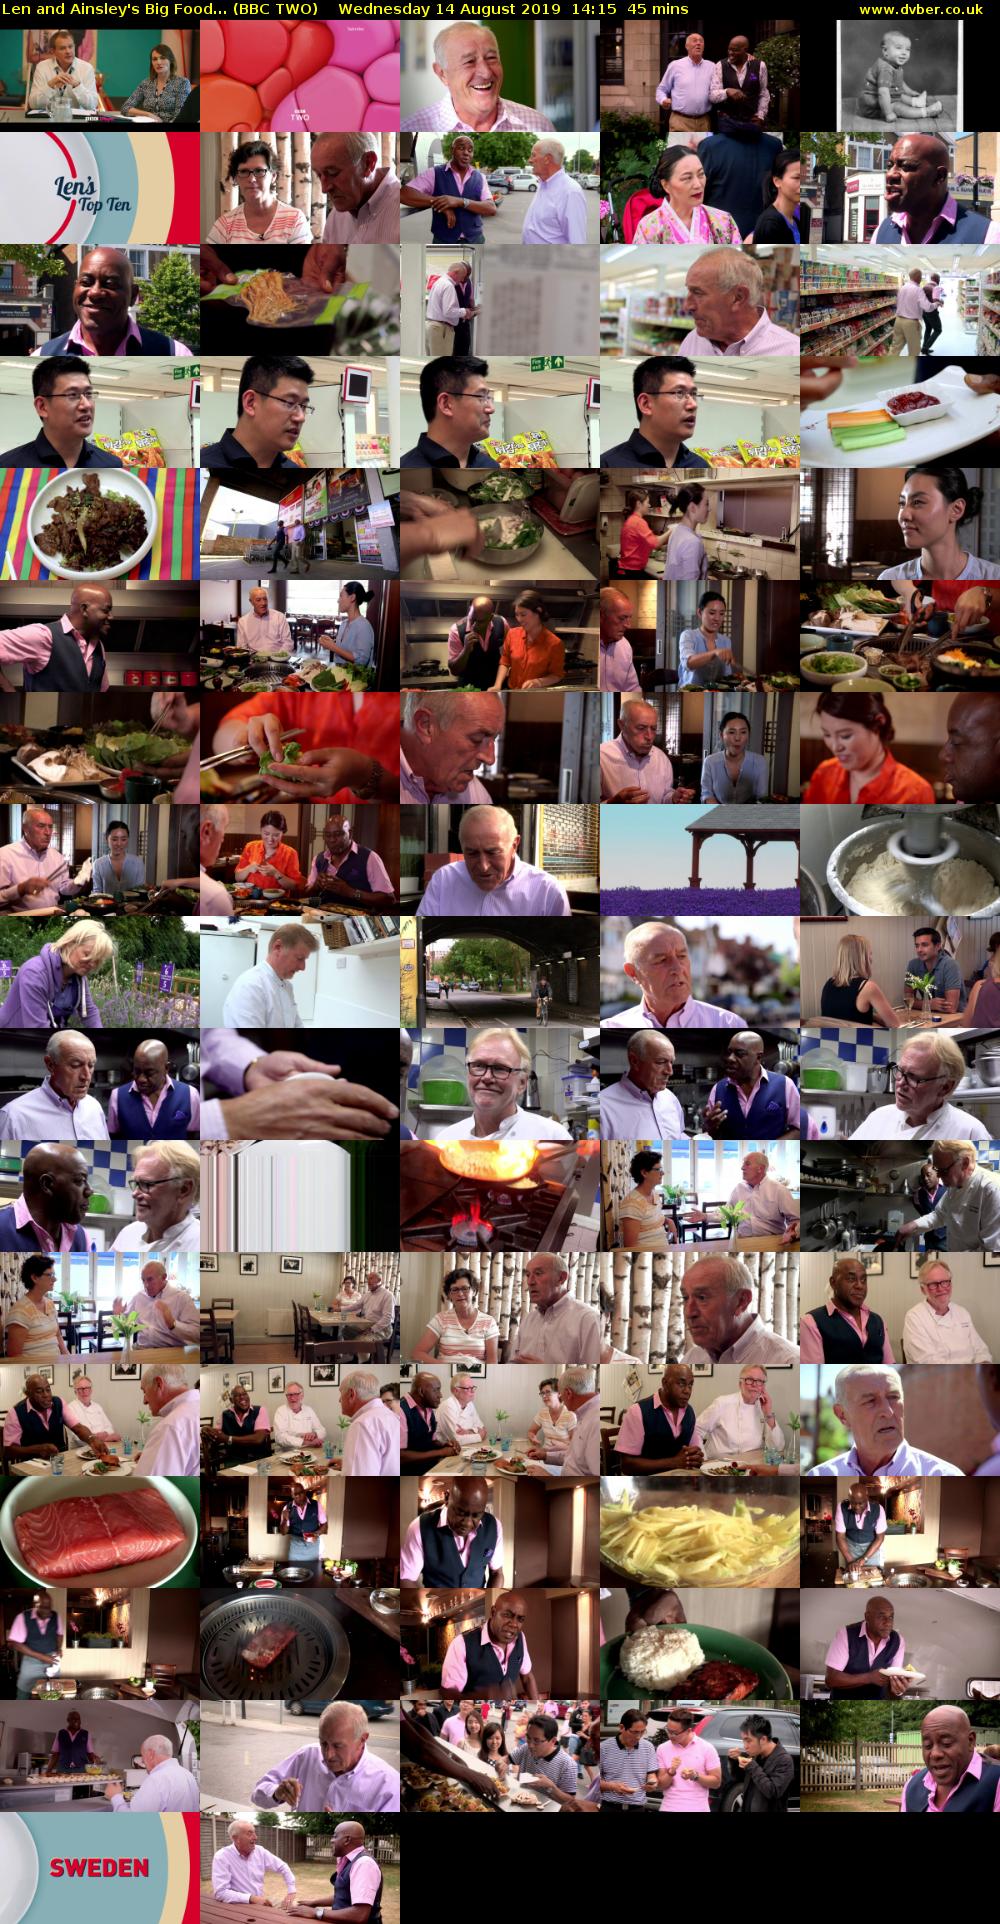 Len and Ainsley's Big Food... (BBC TWO) Wednesday 14 August 2019 14:15 - 15:00